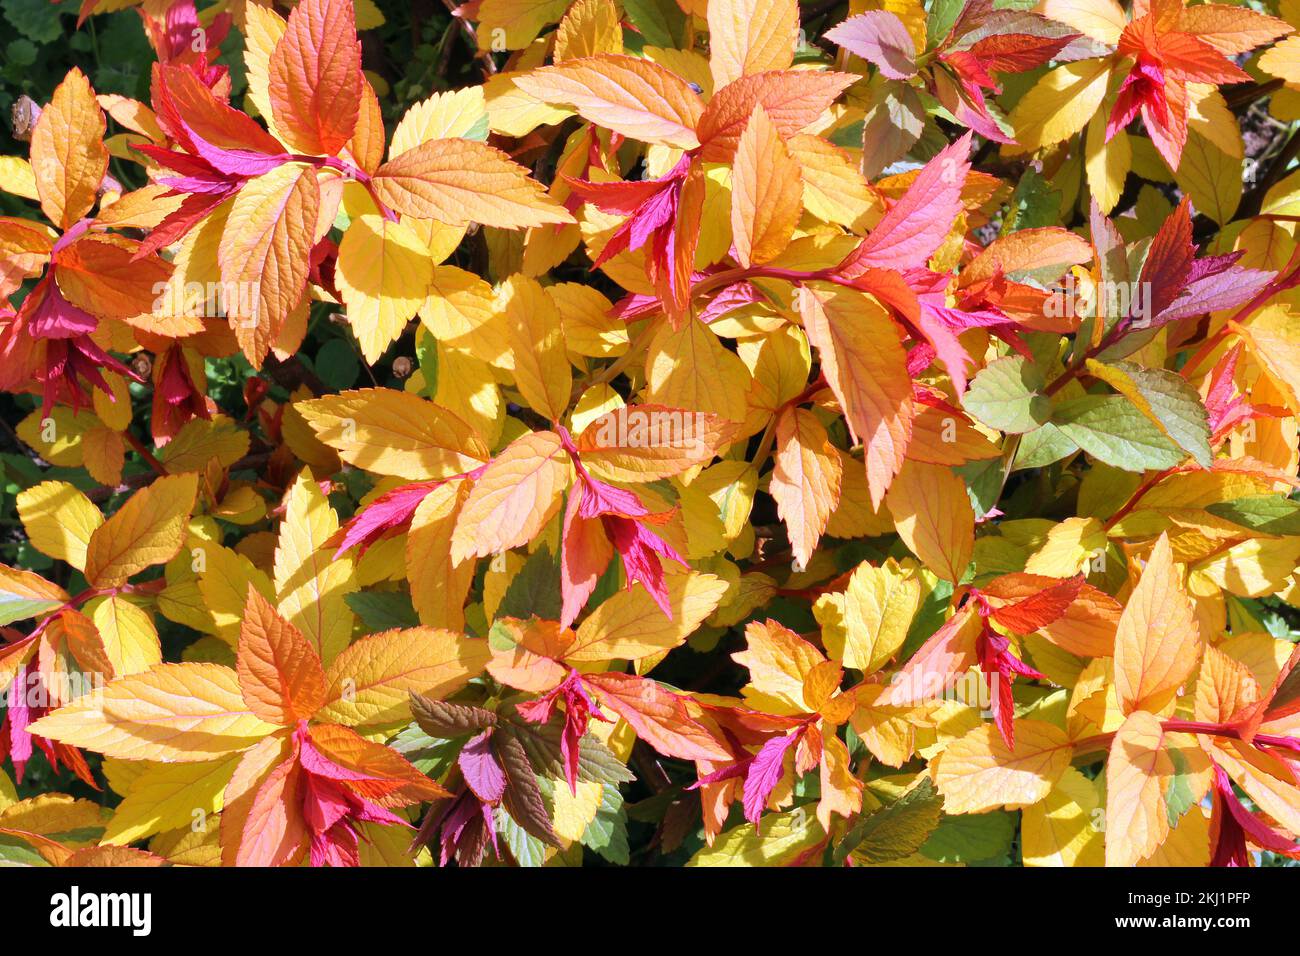 Spiraea japonica shrub with red and golden leaves. Stock Photo